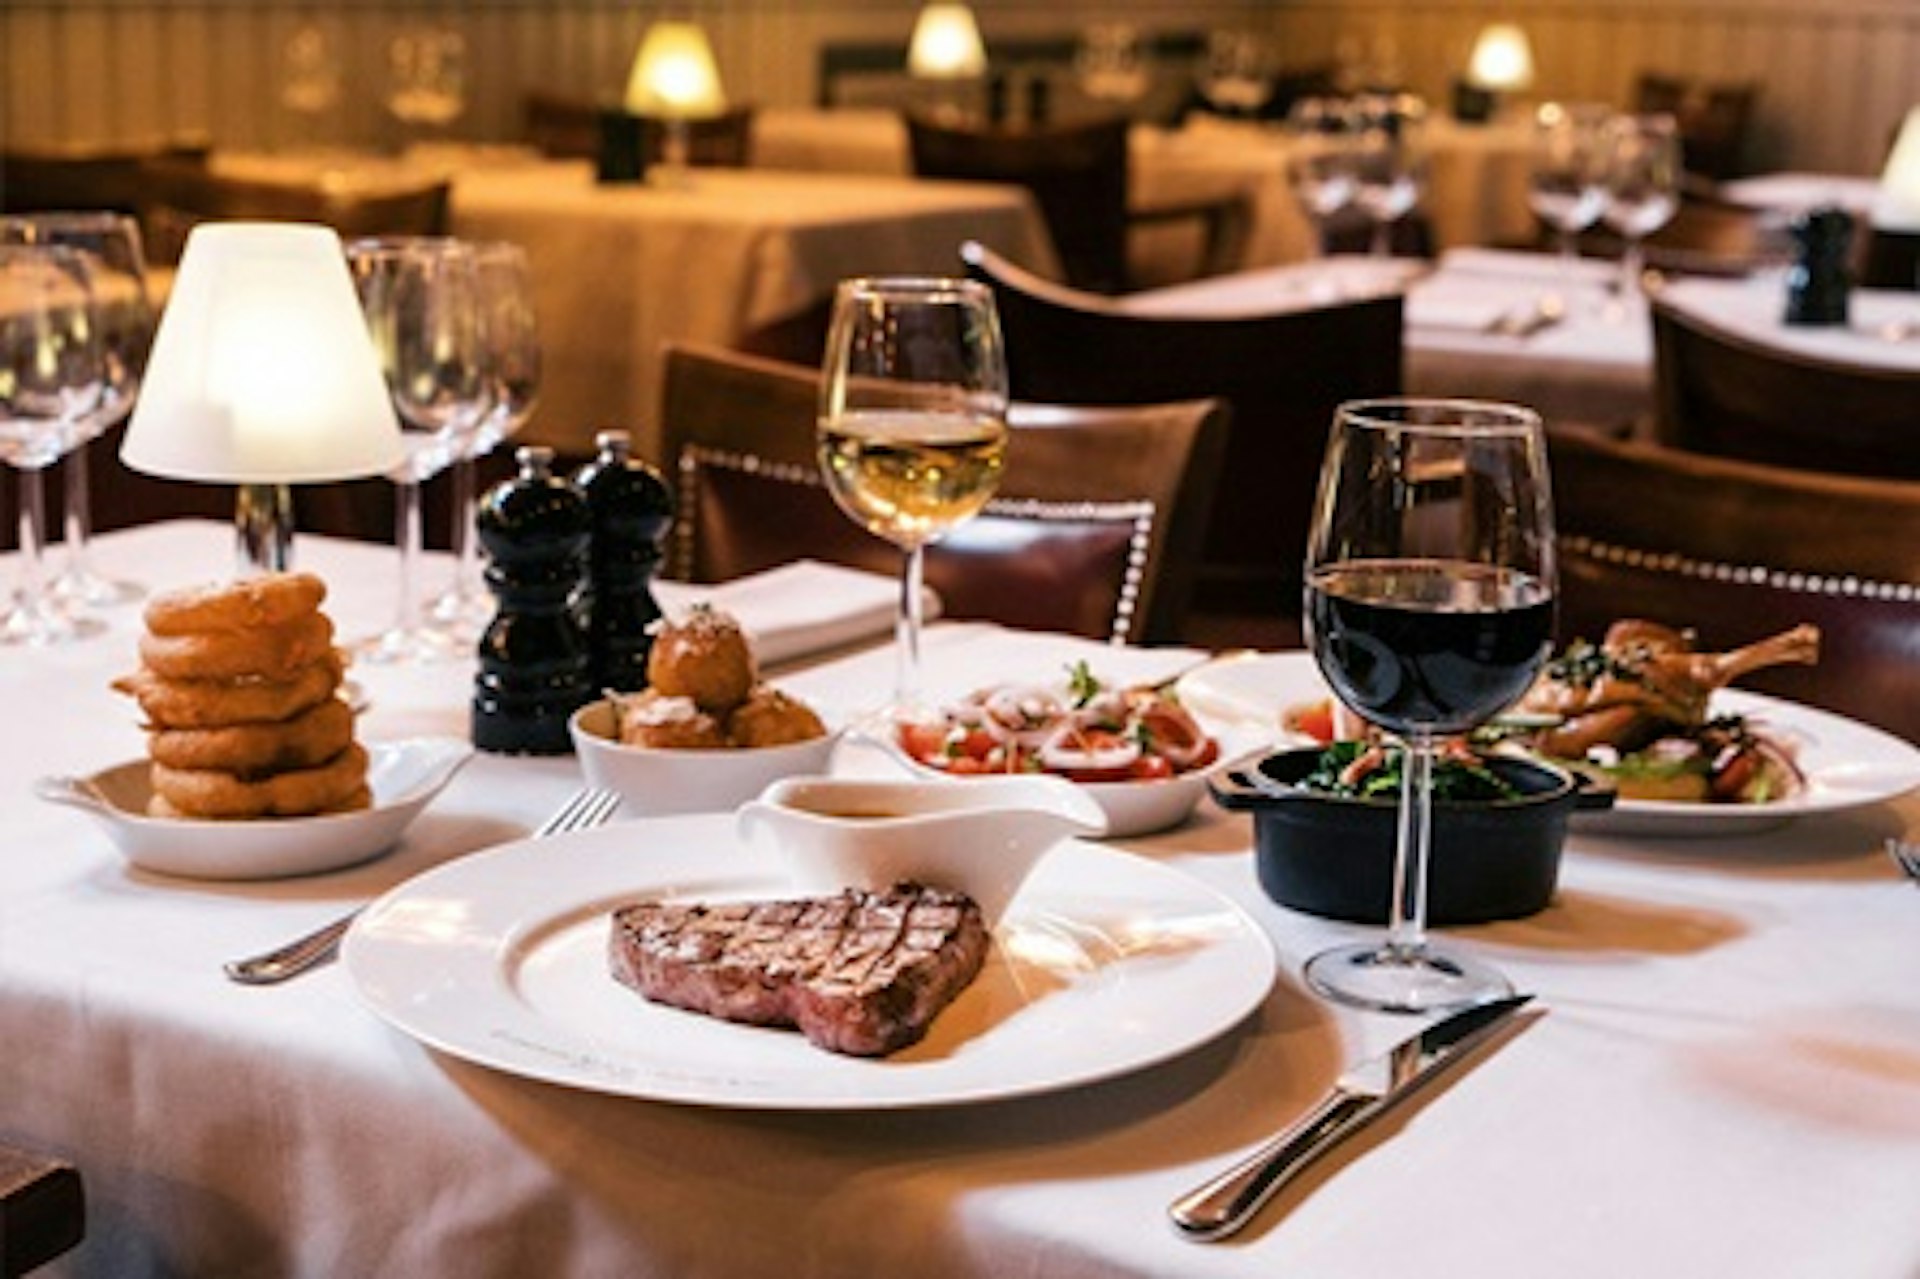 Complete Dining Experience with Wine for Two at Marco Pierre White's London Steakhouse Co 1